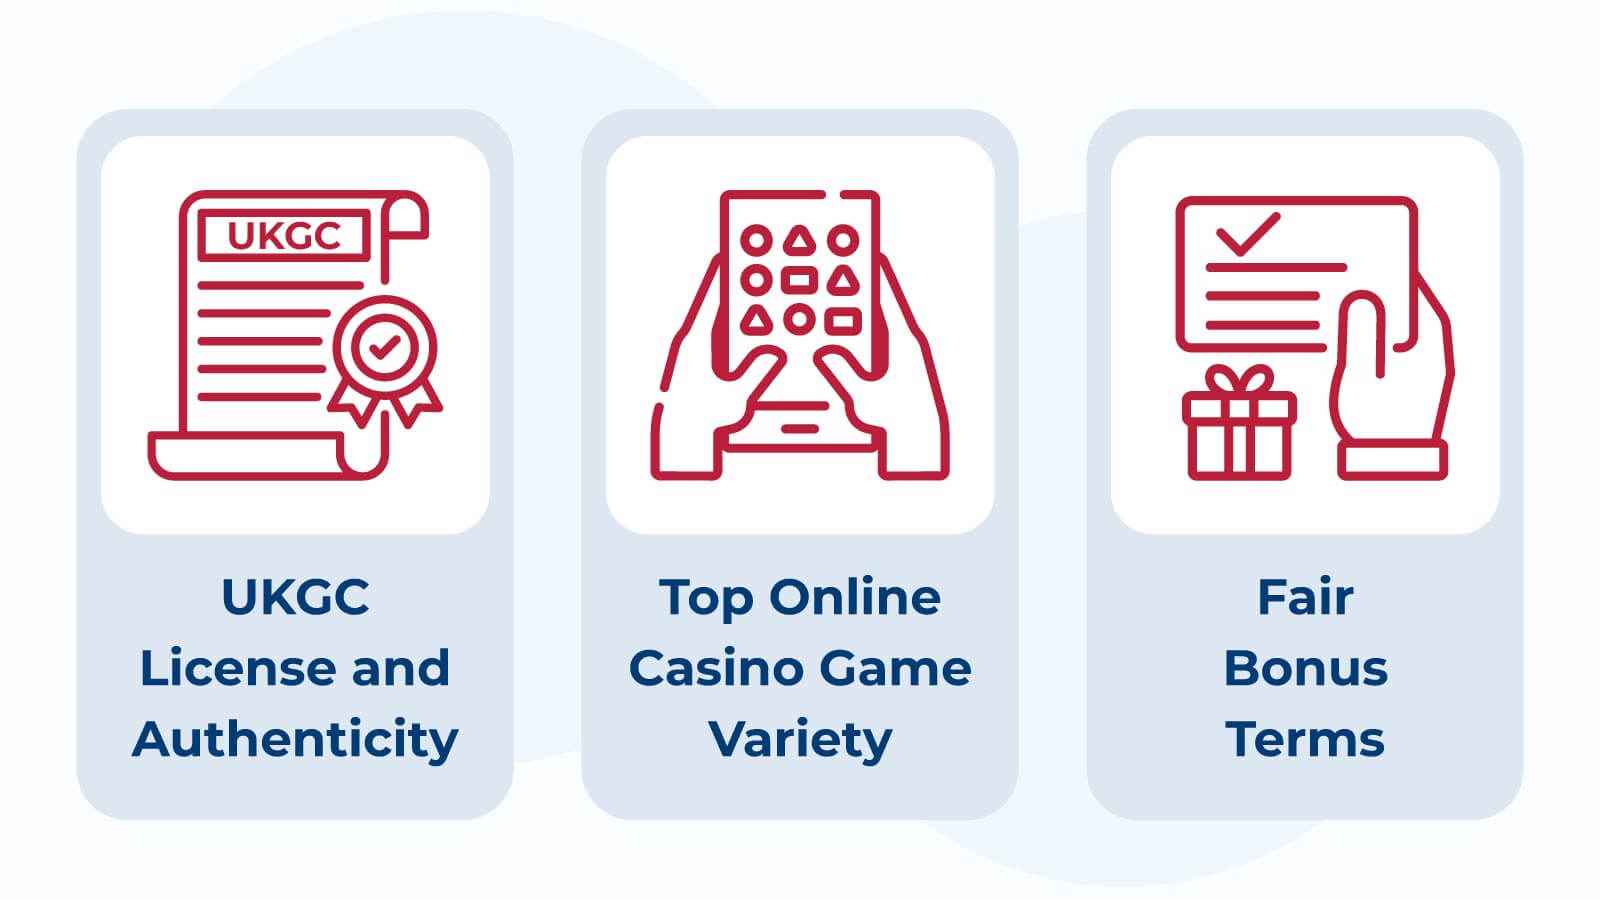 How We Select Our Casino Rewards Partners